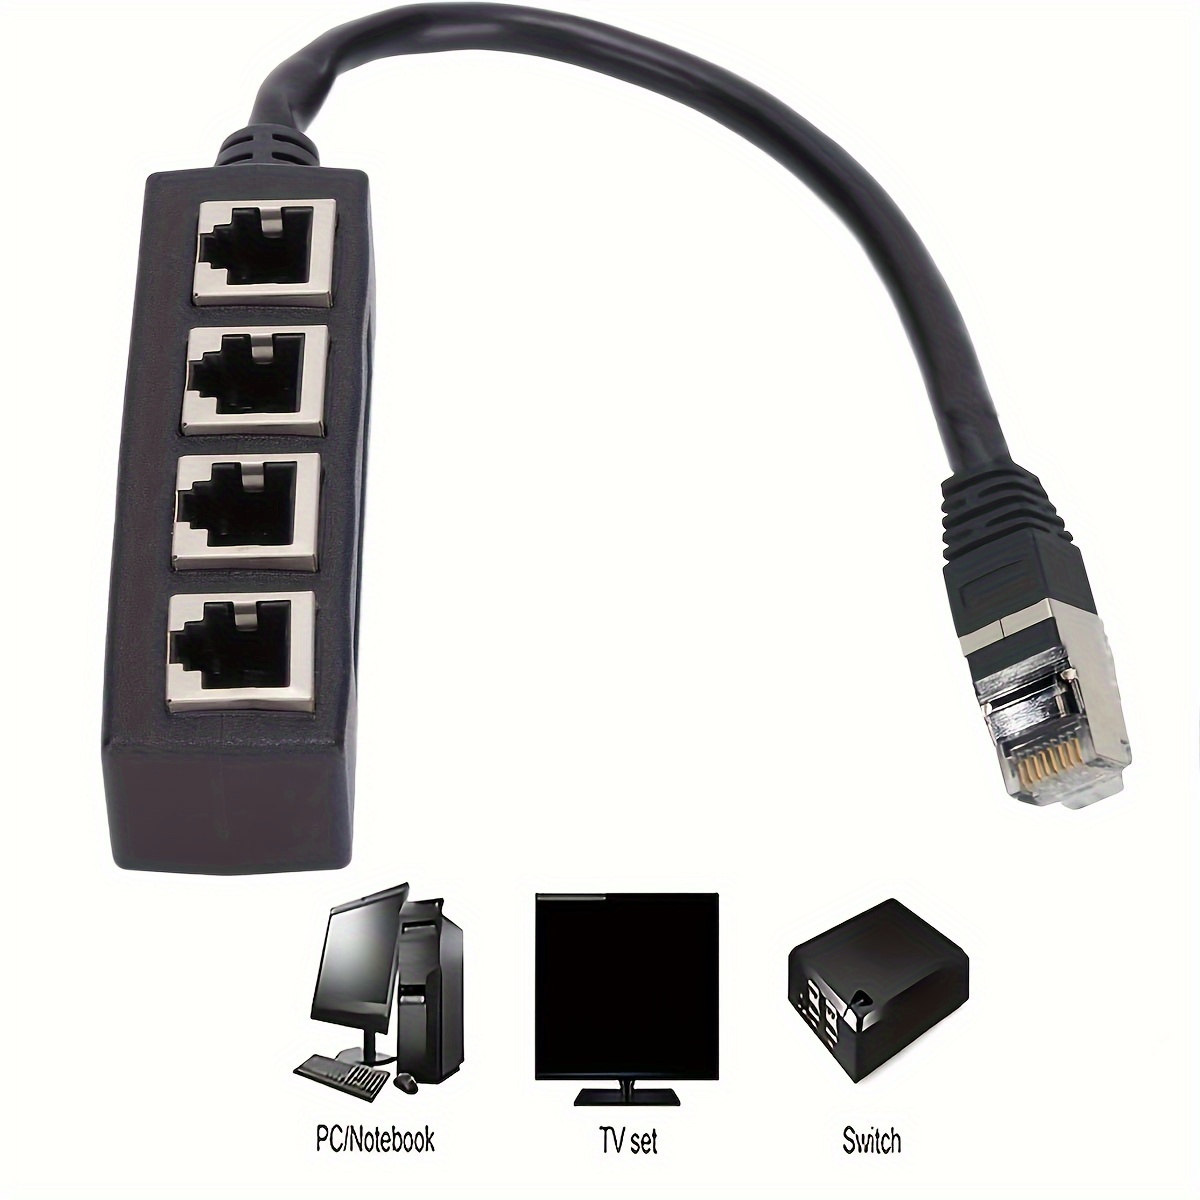 2 In 1 Out Network Switch Box Selector 2 Ports RJ45 CAT6 LAN HUB Ethernet  Network Cable Splitter Connector Adapter For Laptop 